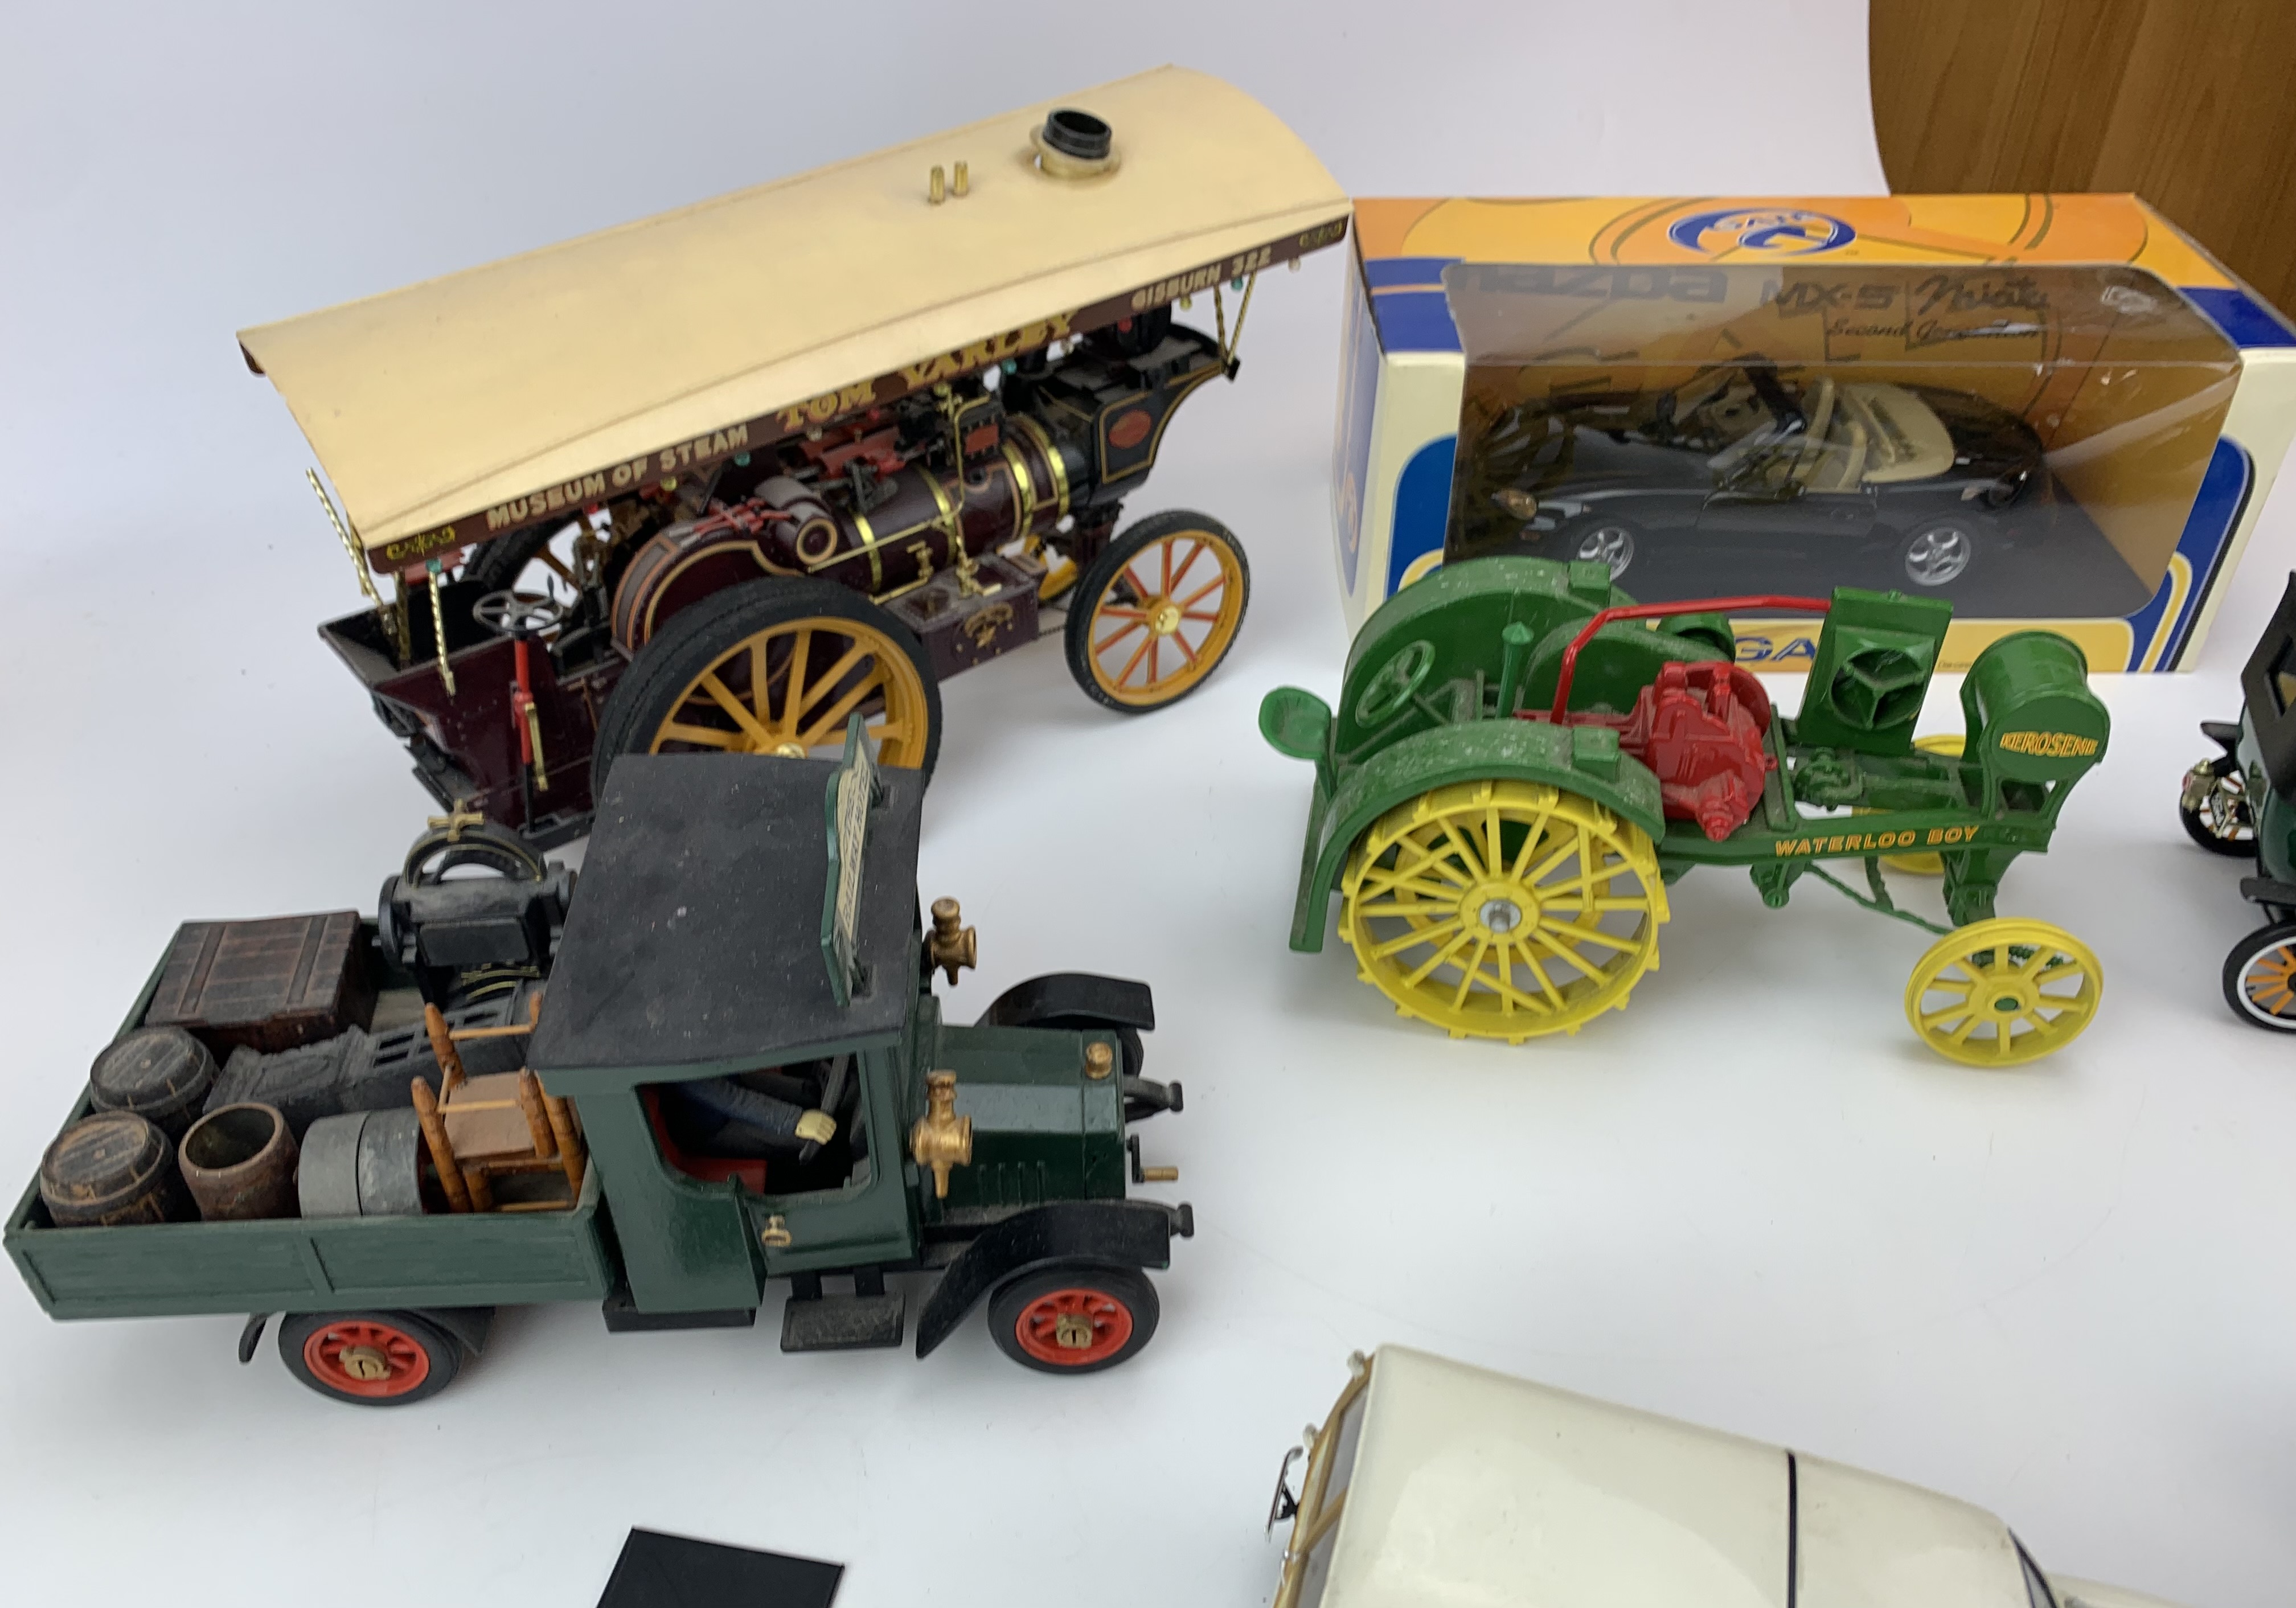 5 loose model cars, boxed Gate Mazda NX5, model Museum of Steam Tom Varley and Waterloo Boy tractor - Image 3 of 17